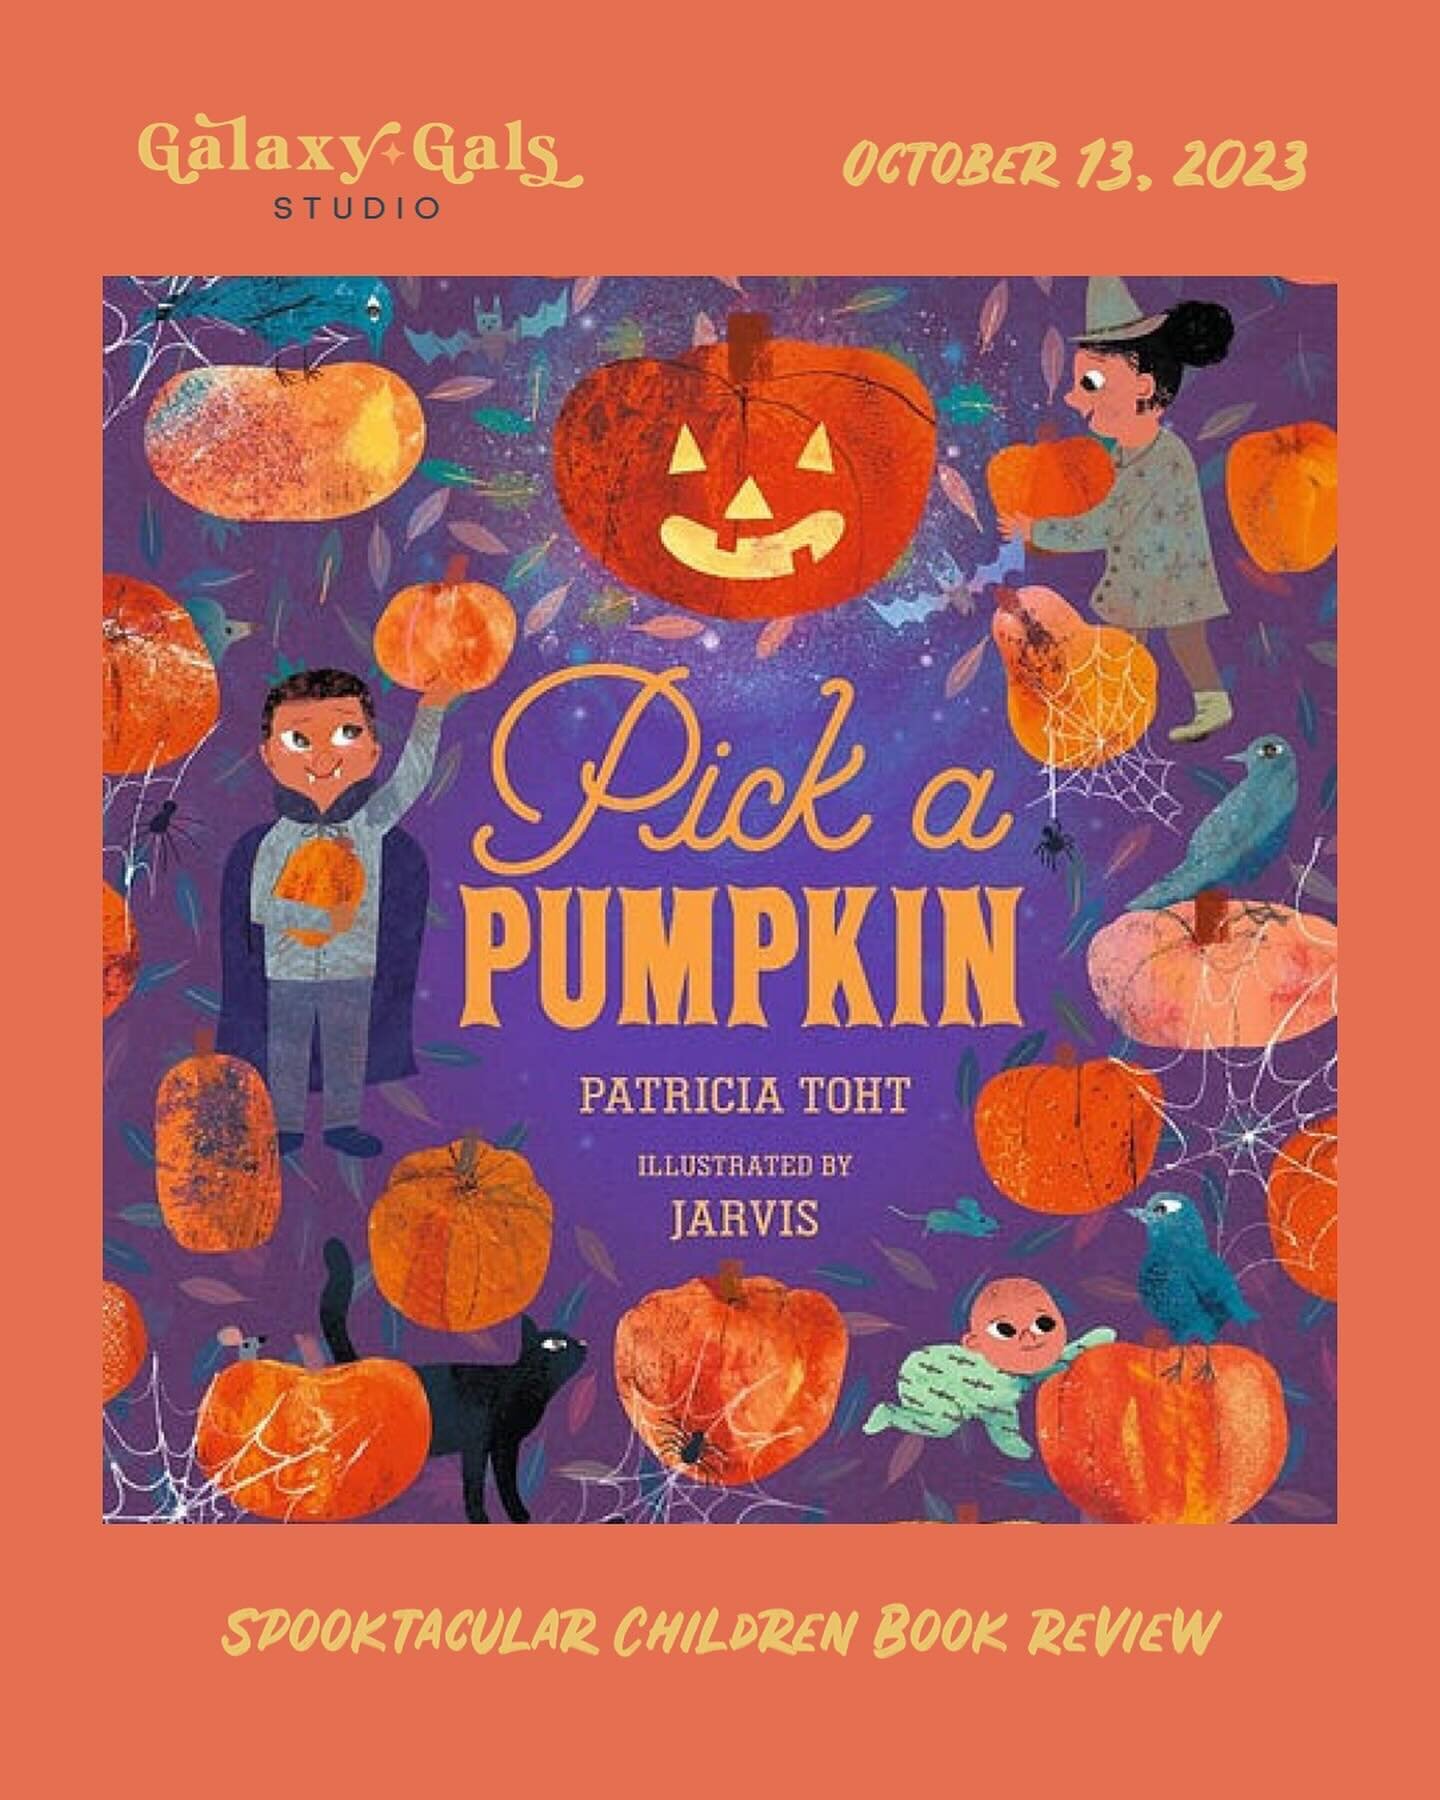 For the full review of Pick A Pumpkin by Patricia Toht, visit our newsletter link in our bio. 

Welcome to our Spooktacular Reads! We are celebrating my favorite holiday by reviewing Halloween and other spooky/fall-themed children&rsquo;s books EVERY